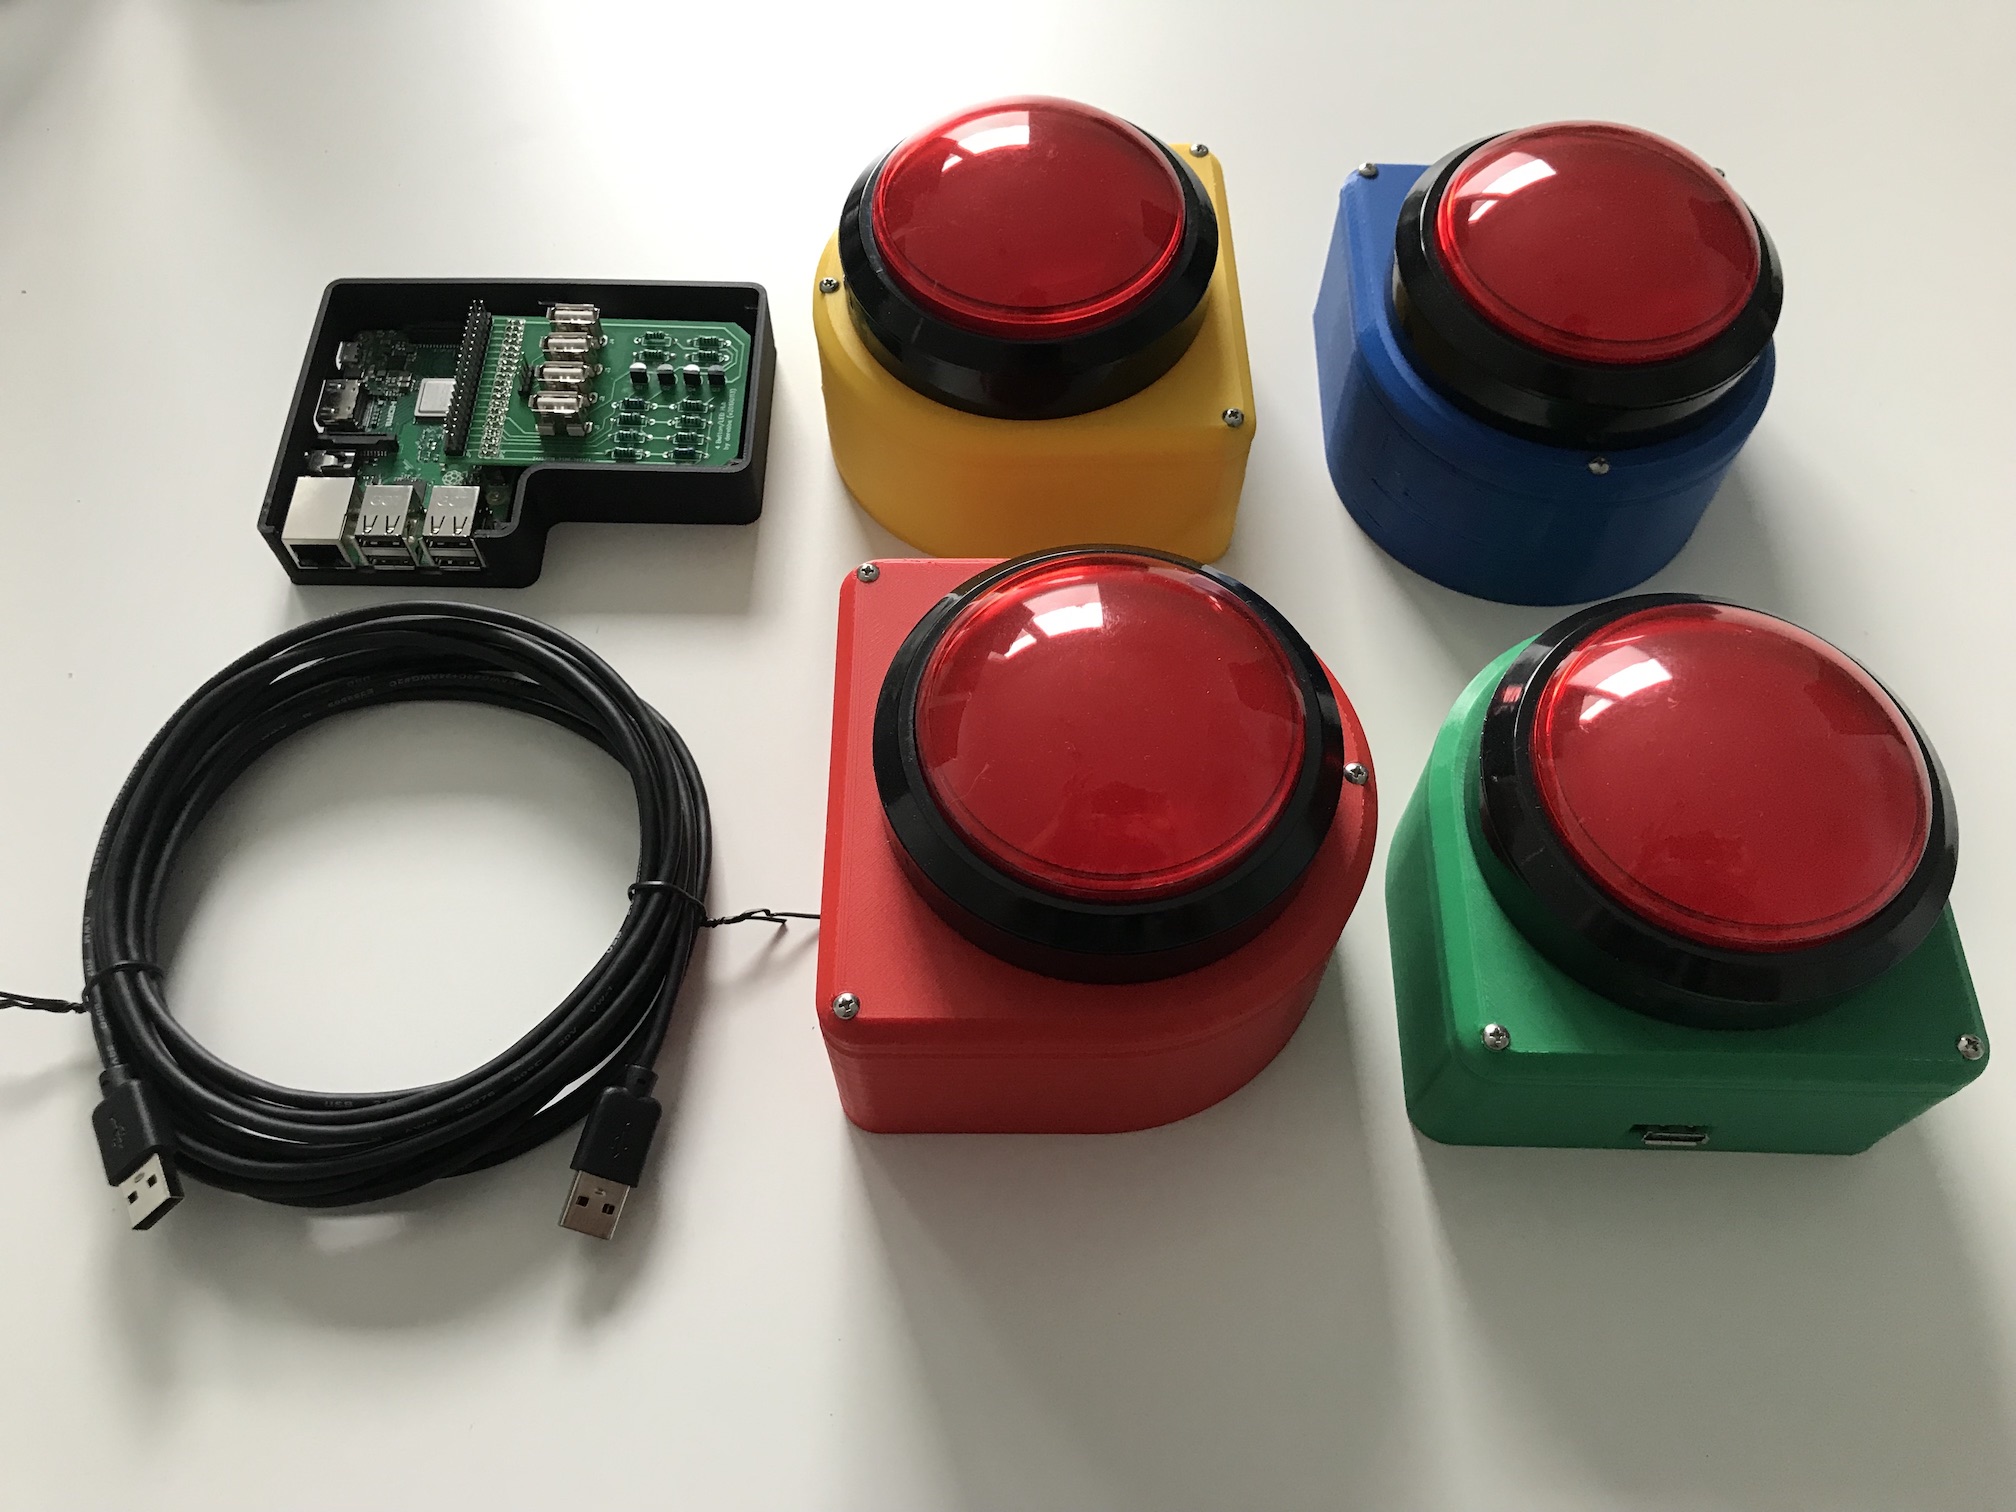 The finished product: Four buzzers, a Raspberry Pi incl. hat